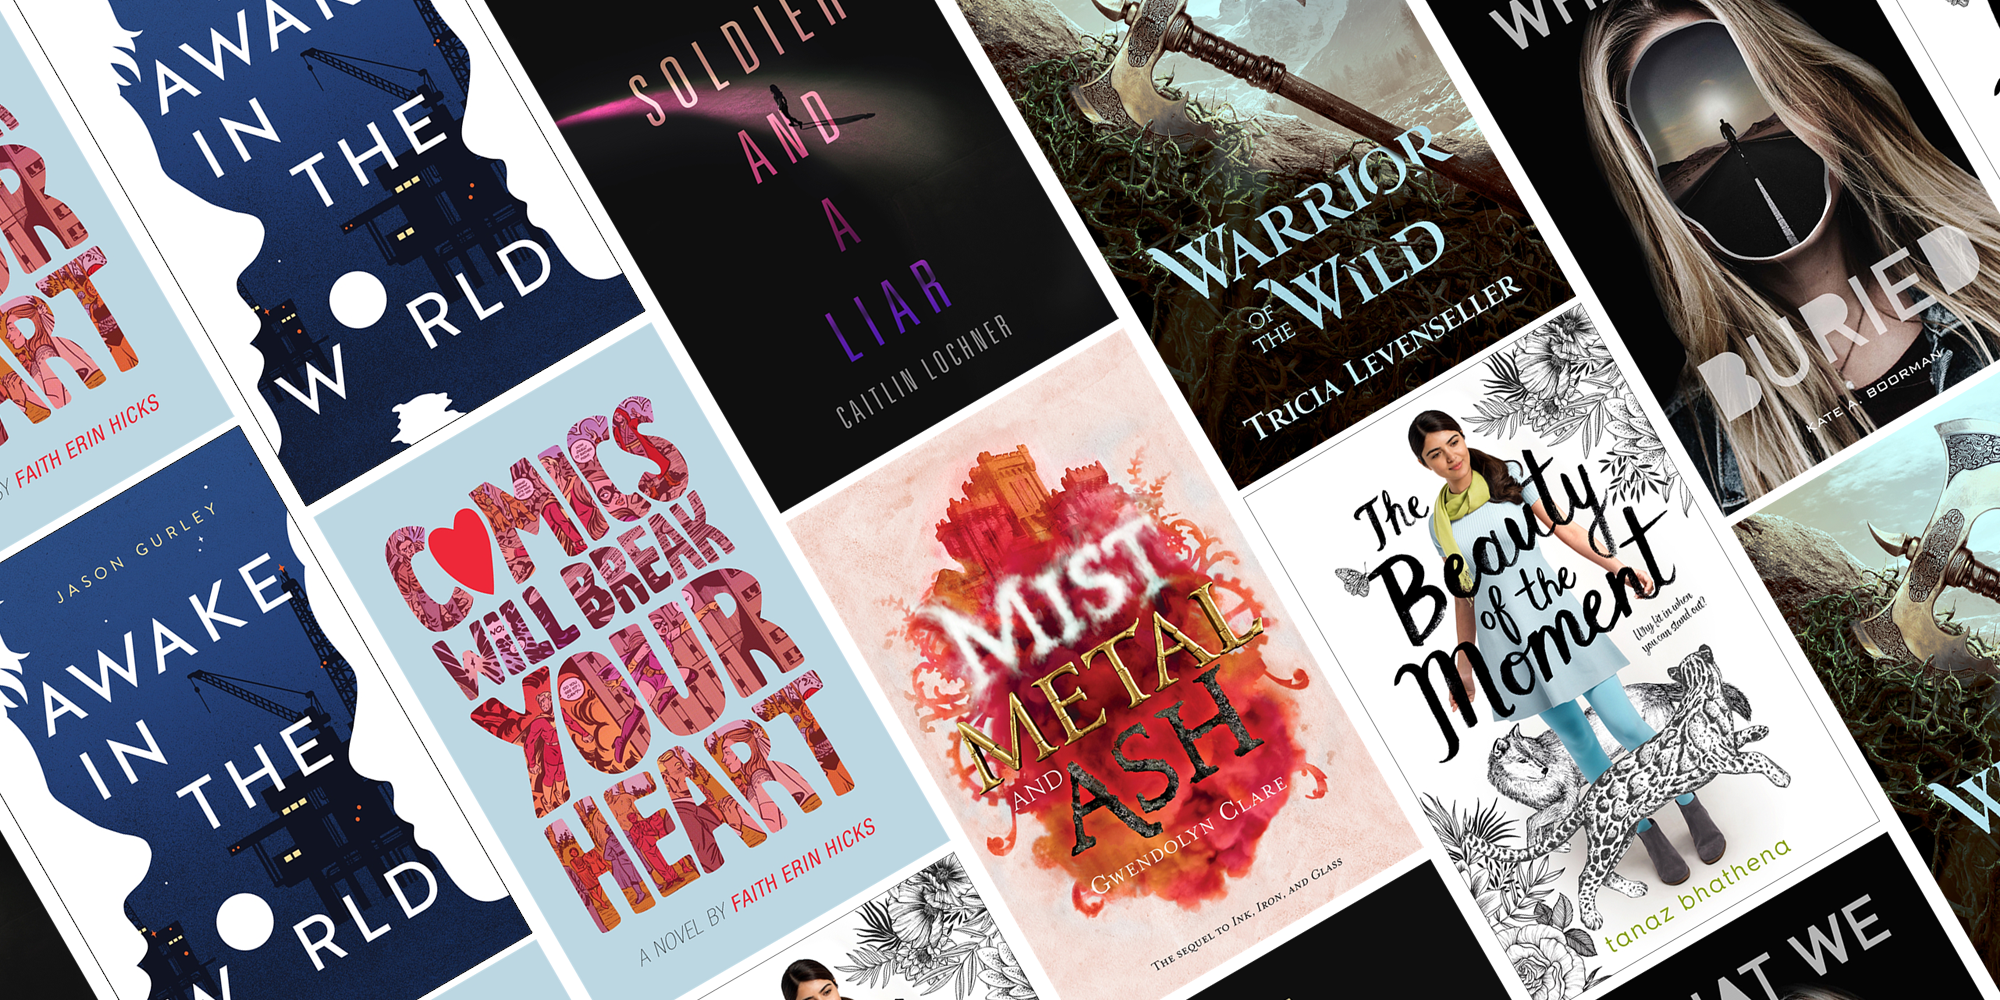 Our February TBR is Looking FINE